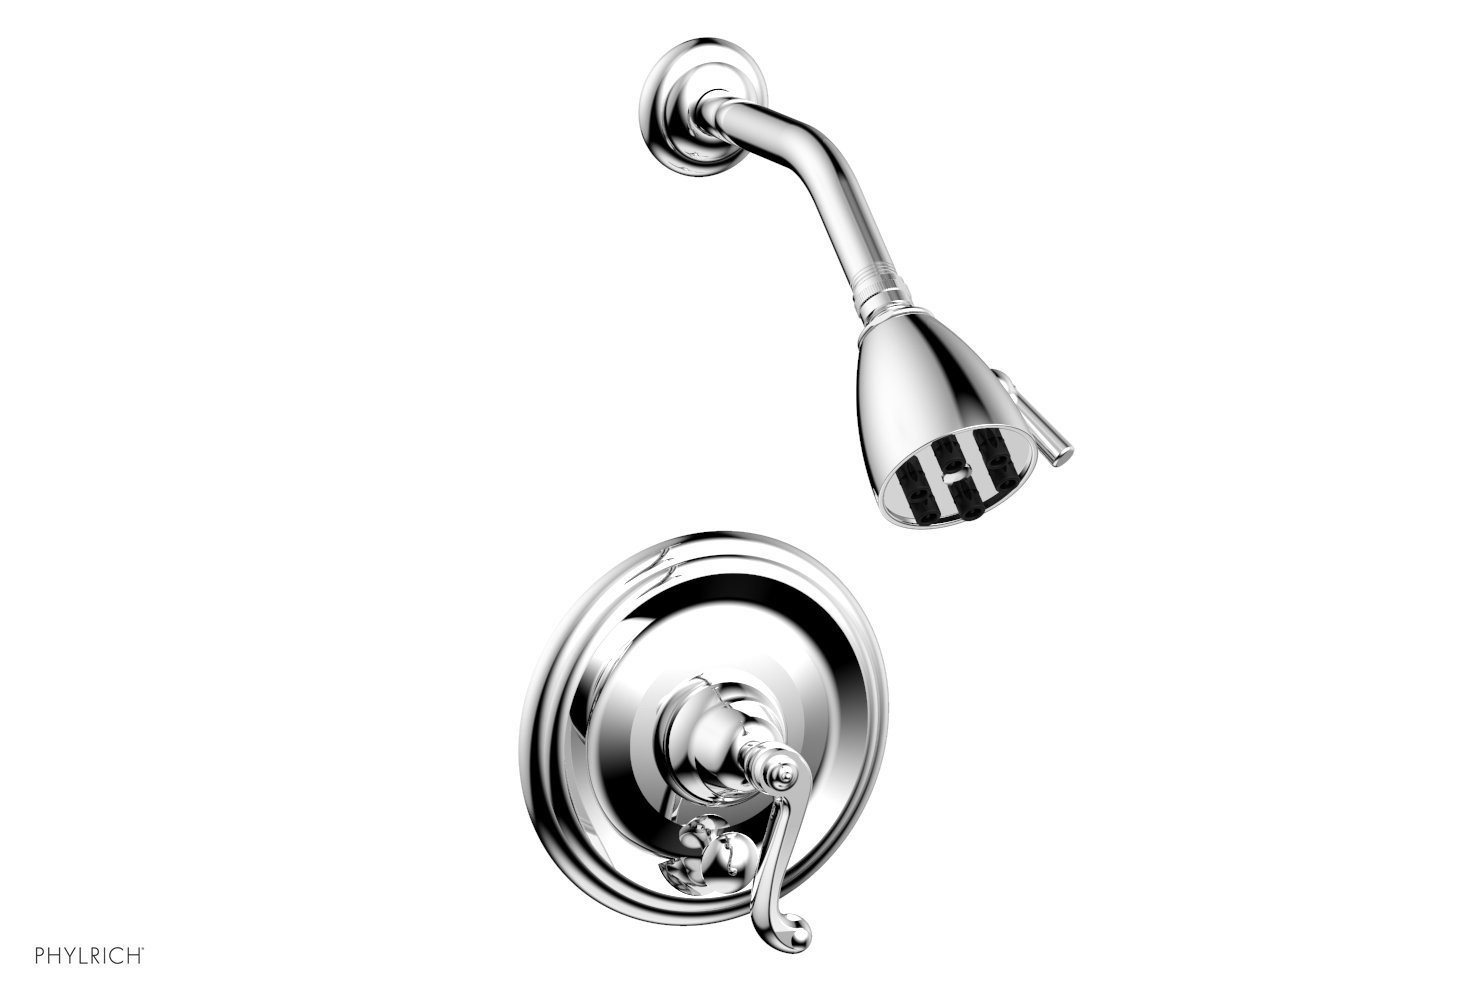 PHYLRICH DPB3102 REVERE & SAVANNAH WALL MOUNT PRESSURE BALANCE SHOWER SET WITH CURVED LEVER HANDLE